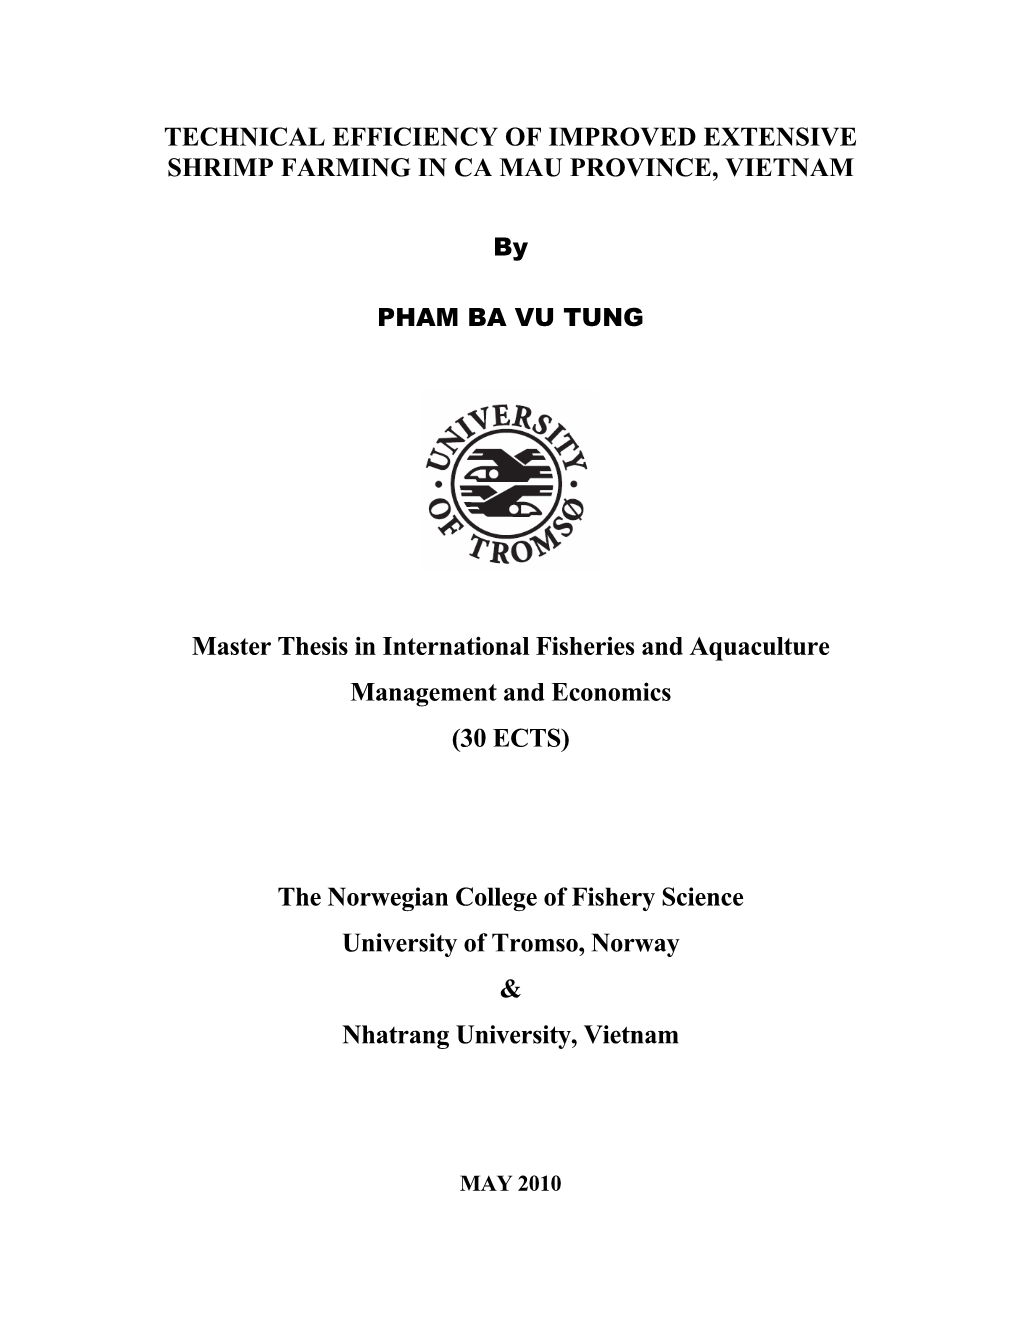 TECHNICAL EFFICIENCY of IMPROVED EXTENSIVE SHRIMP FARMING in CA MAU PROVINCE, VIETNAM Master Thesis in International Fisheries A